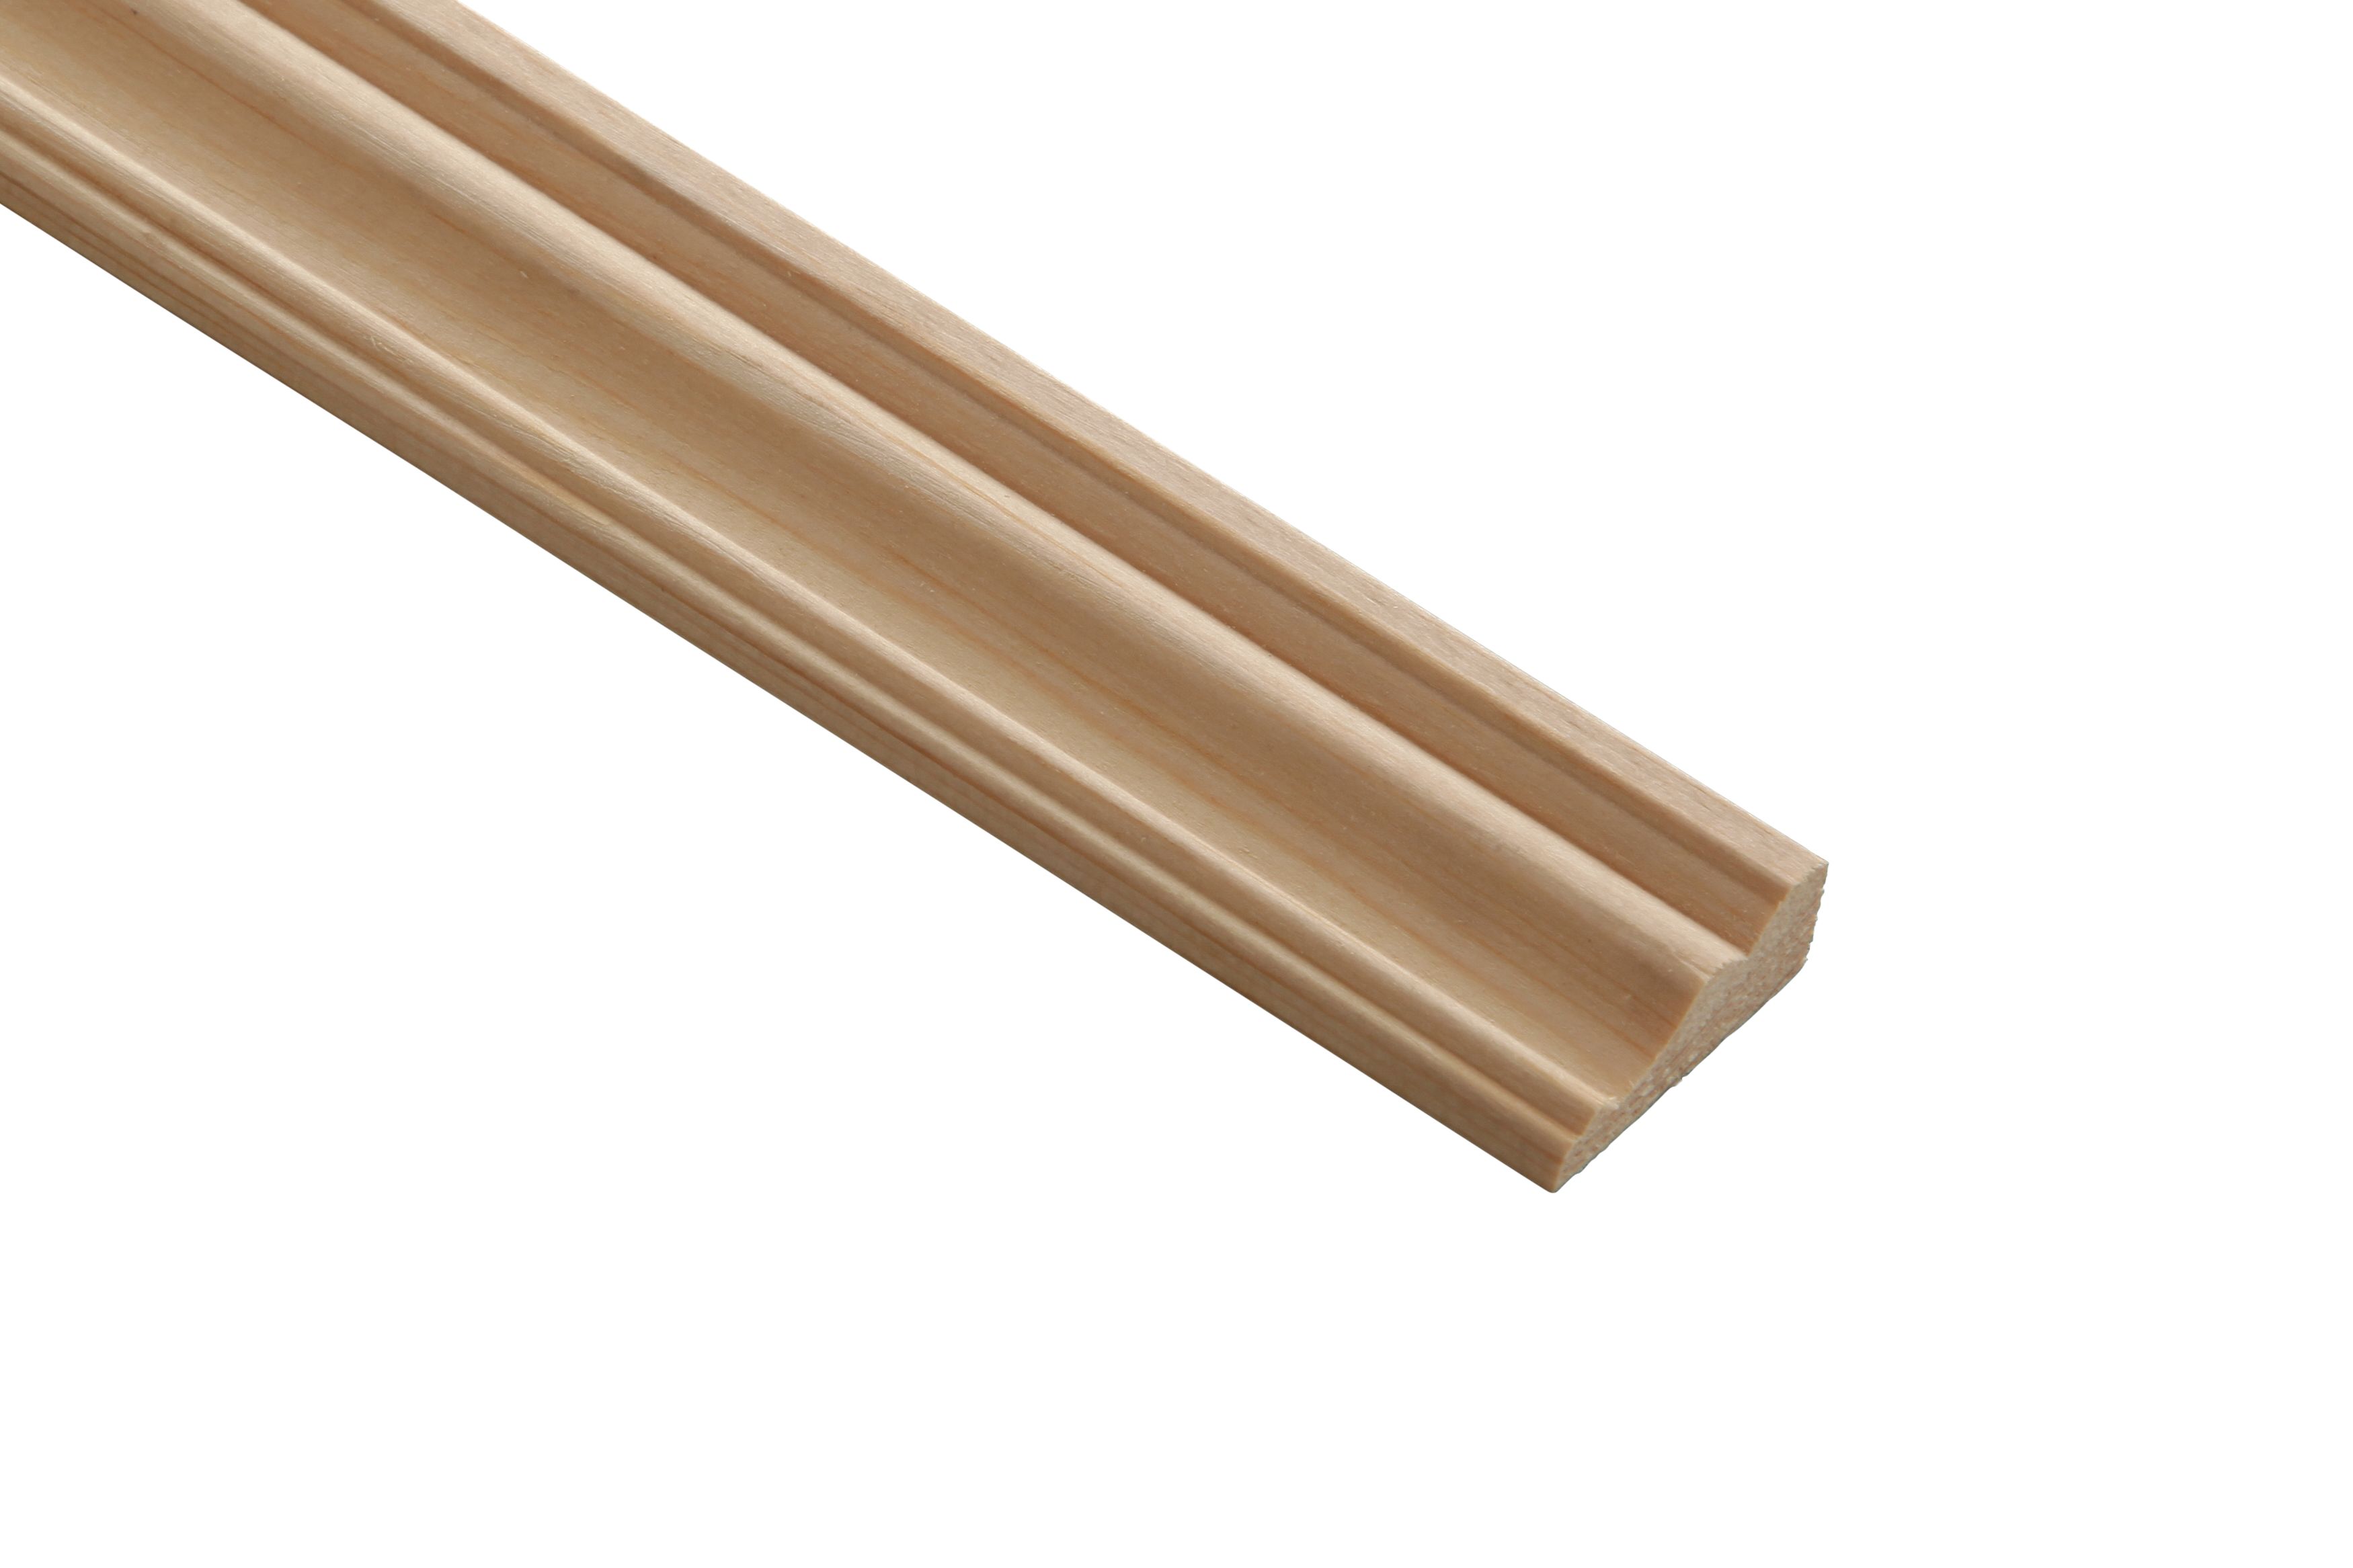 Image of Wickes Pine Decorative Cover Moulding - 31 x 12 x 2400mm